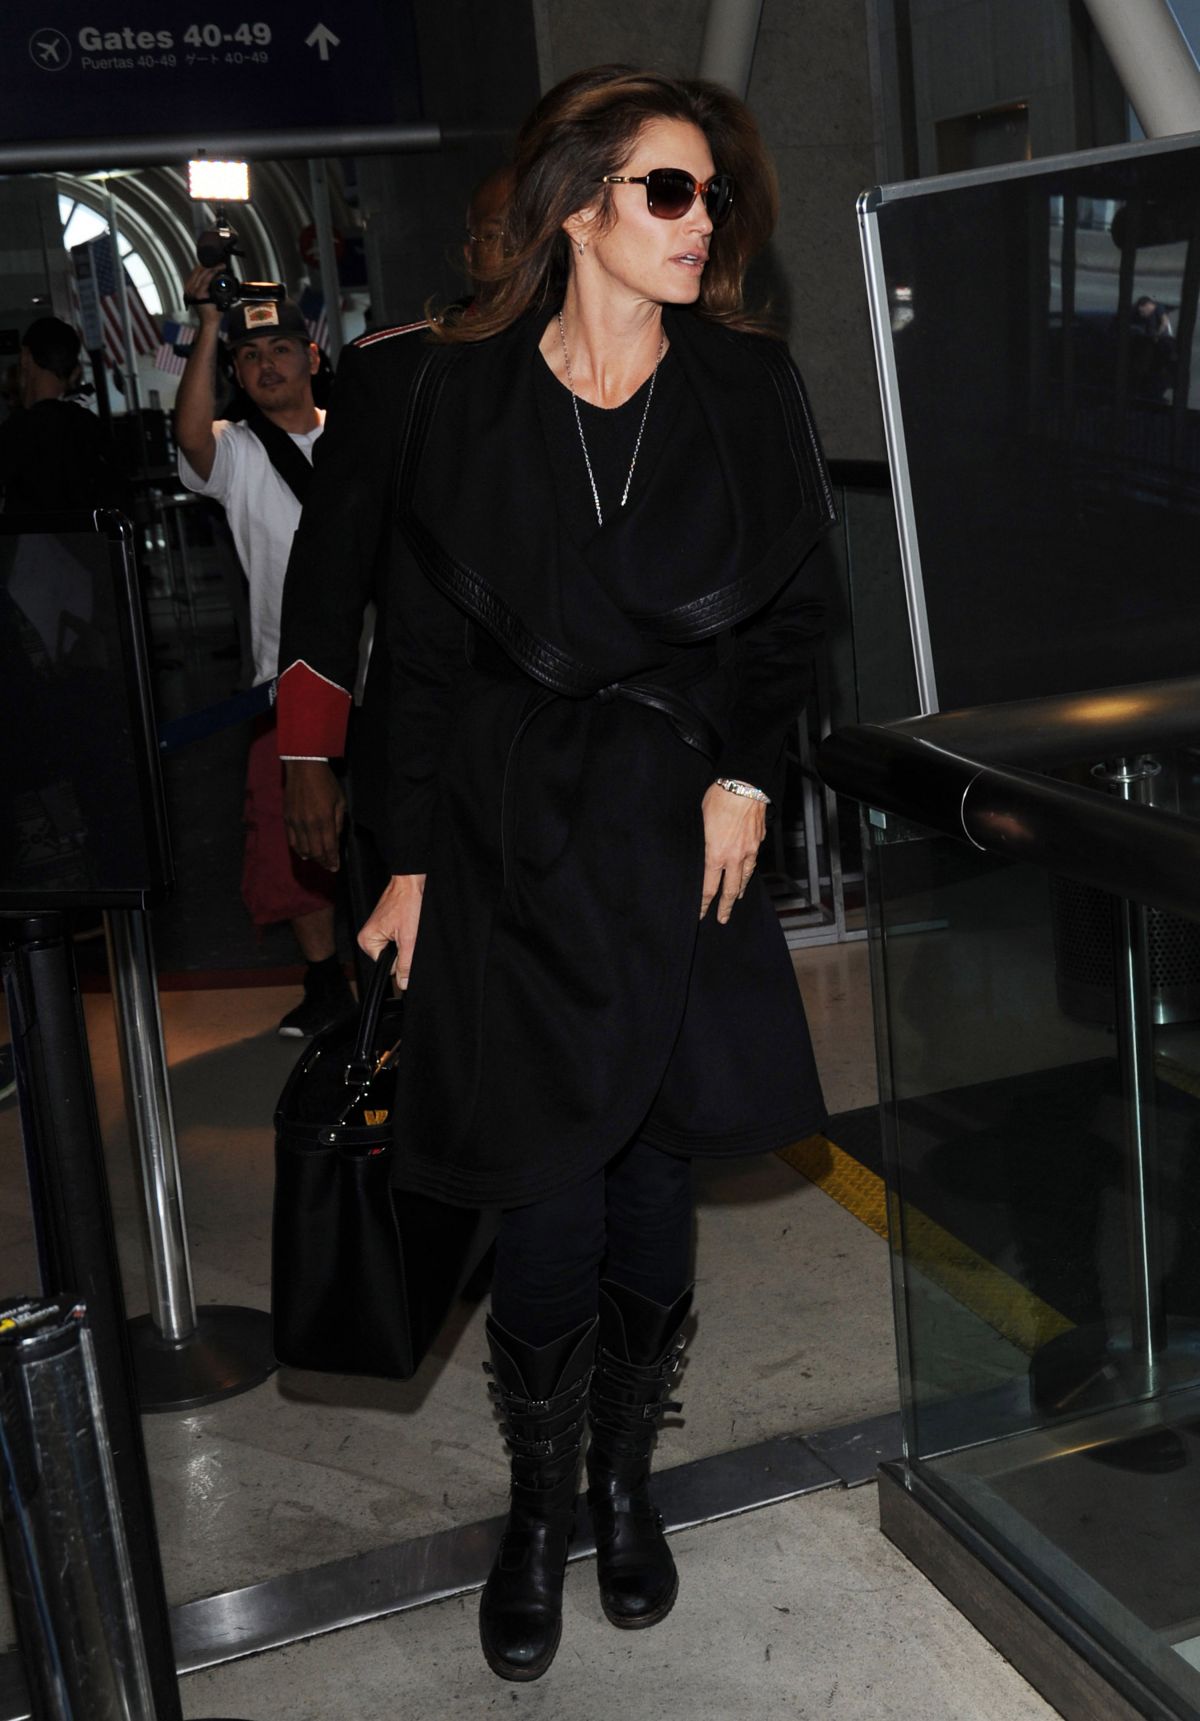 CINDY CRAWFORD at LAX Airport in Los Angeles – HawtCelebs